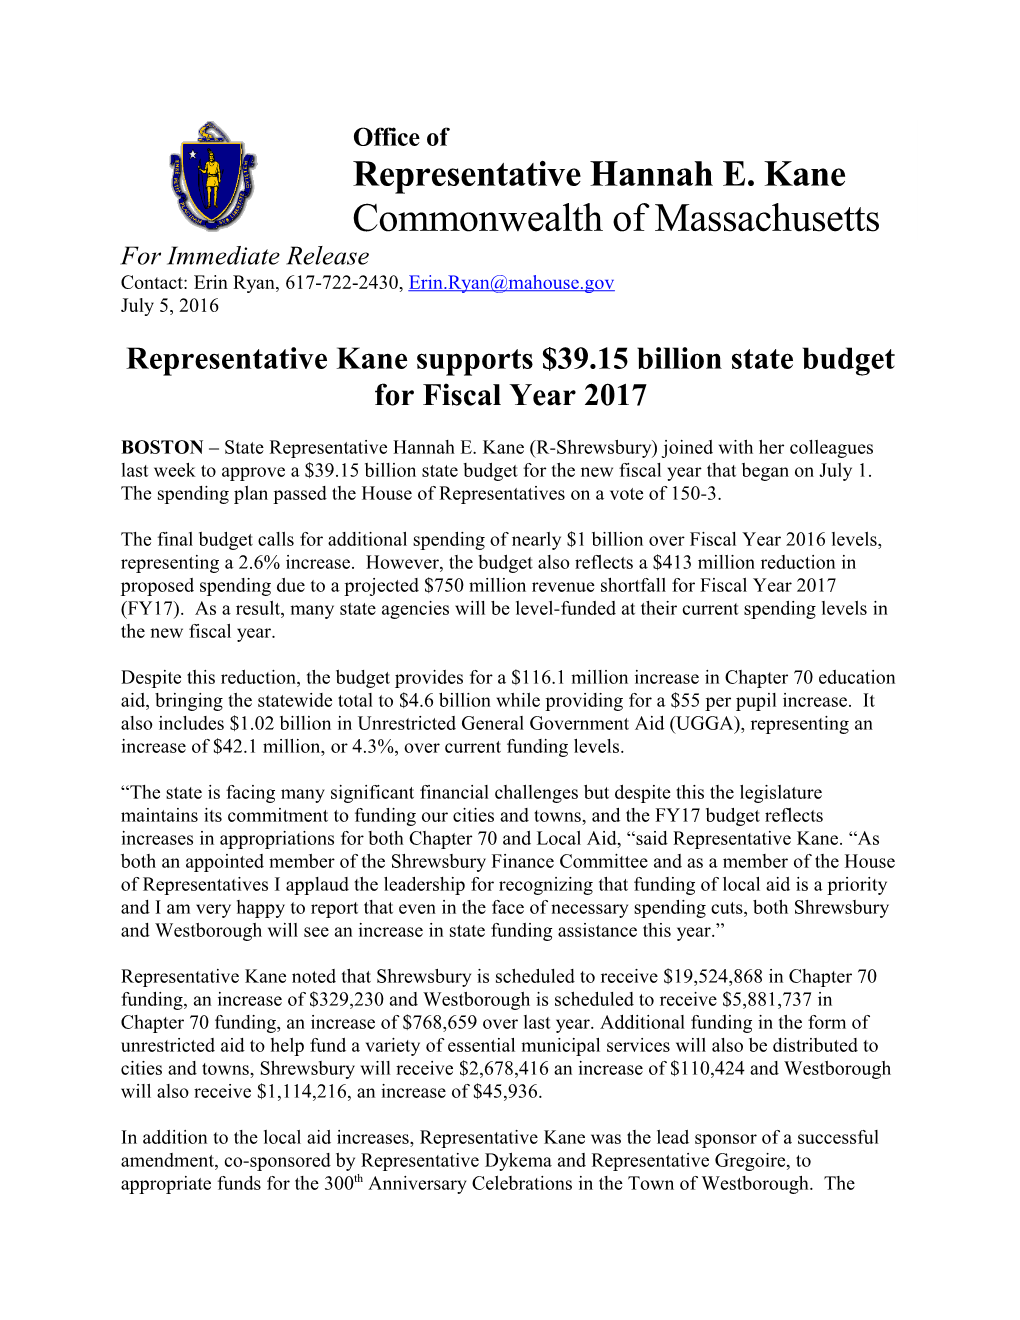 Representative Kane Supports $39.15 Billion State Budget for Fiscal Year 2017